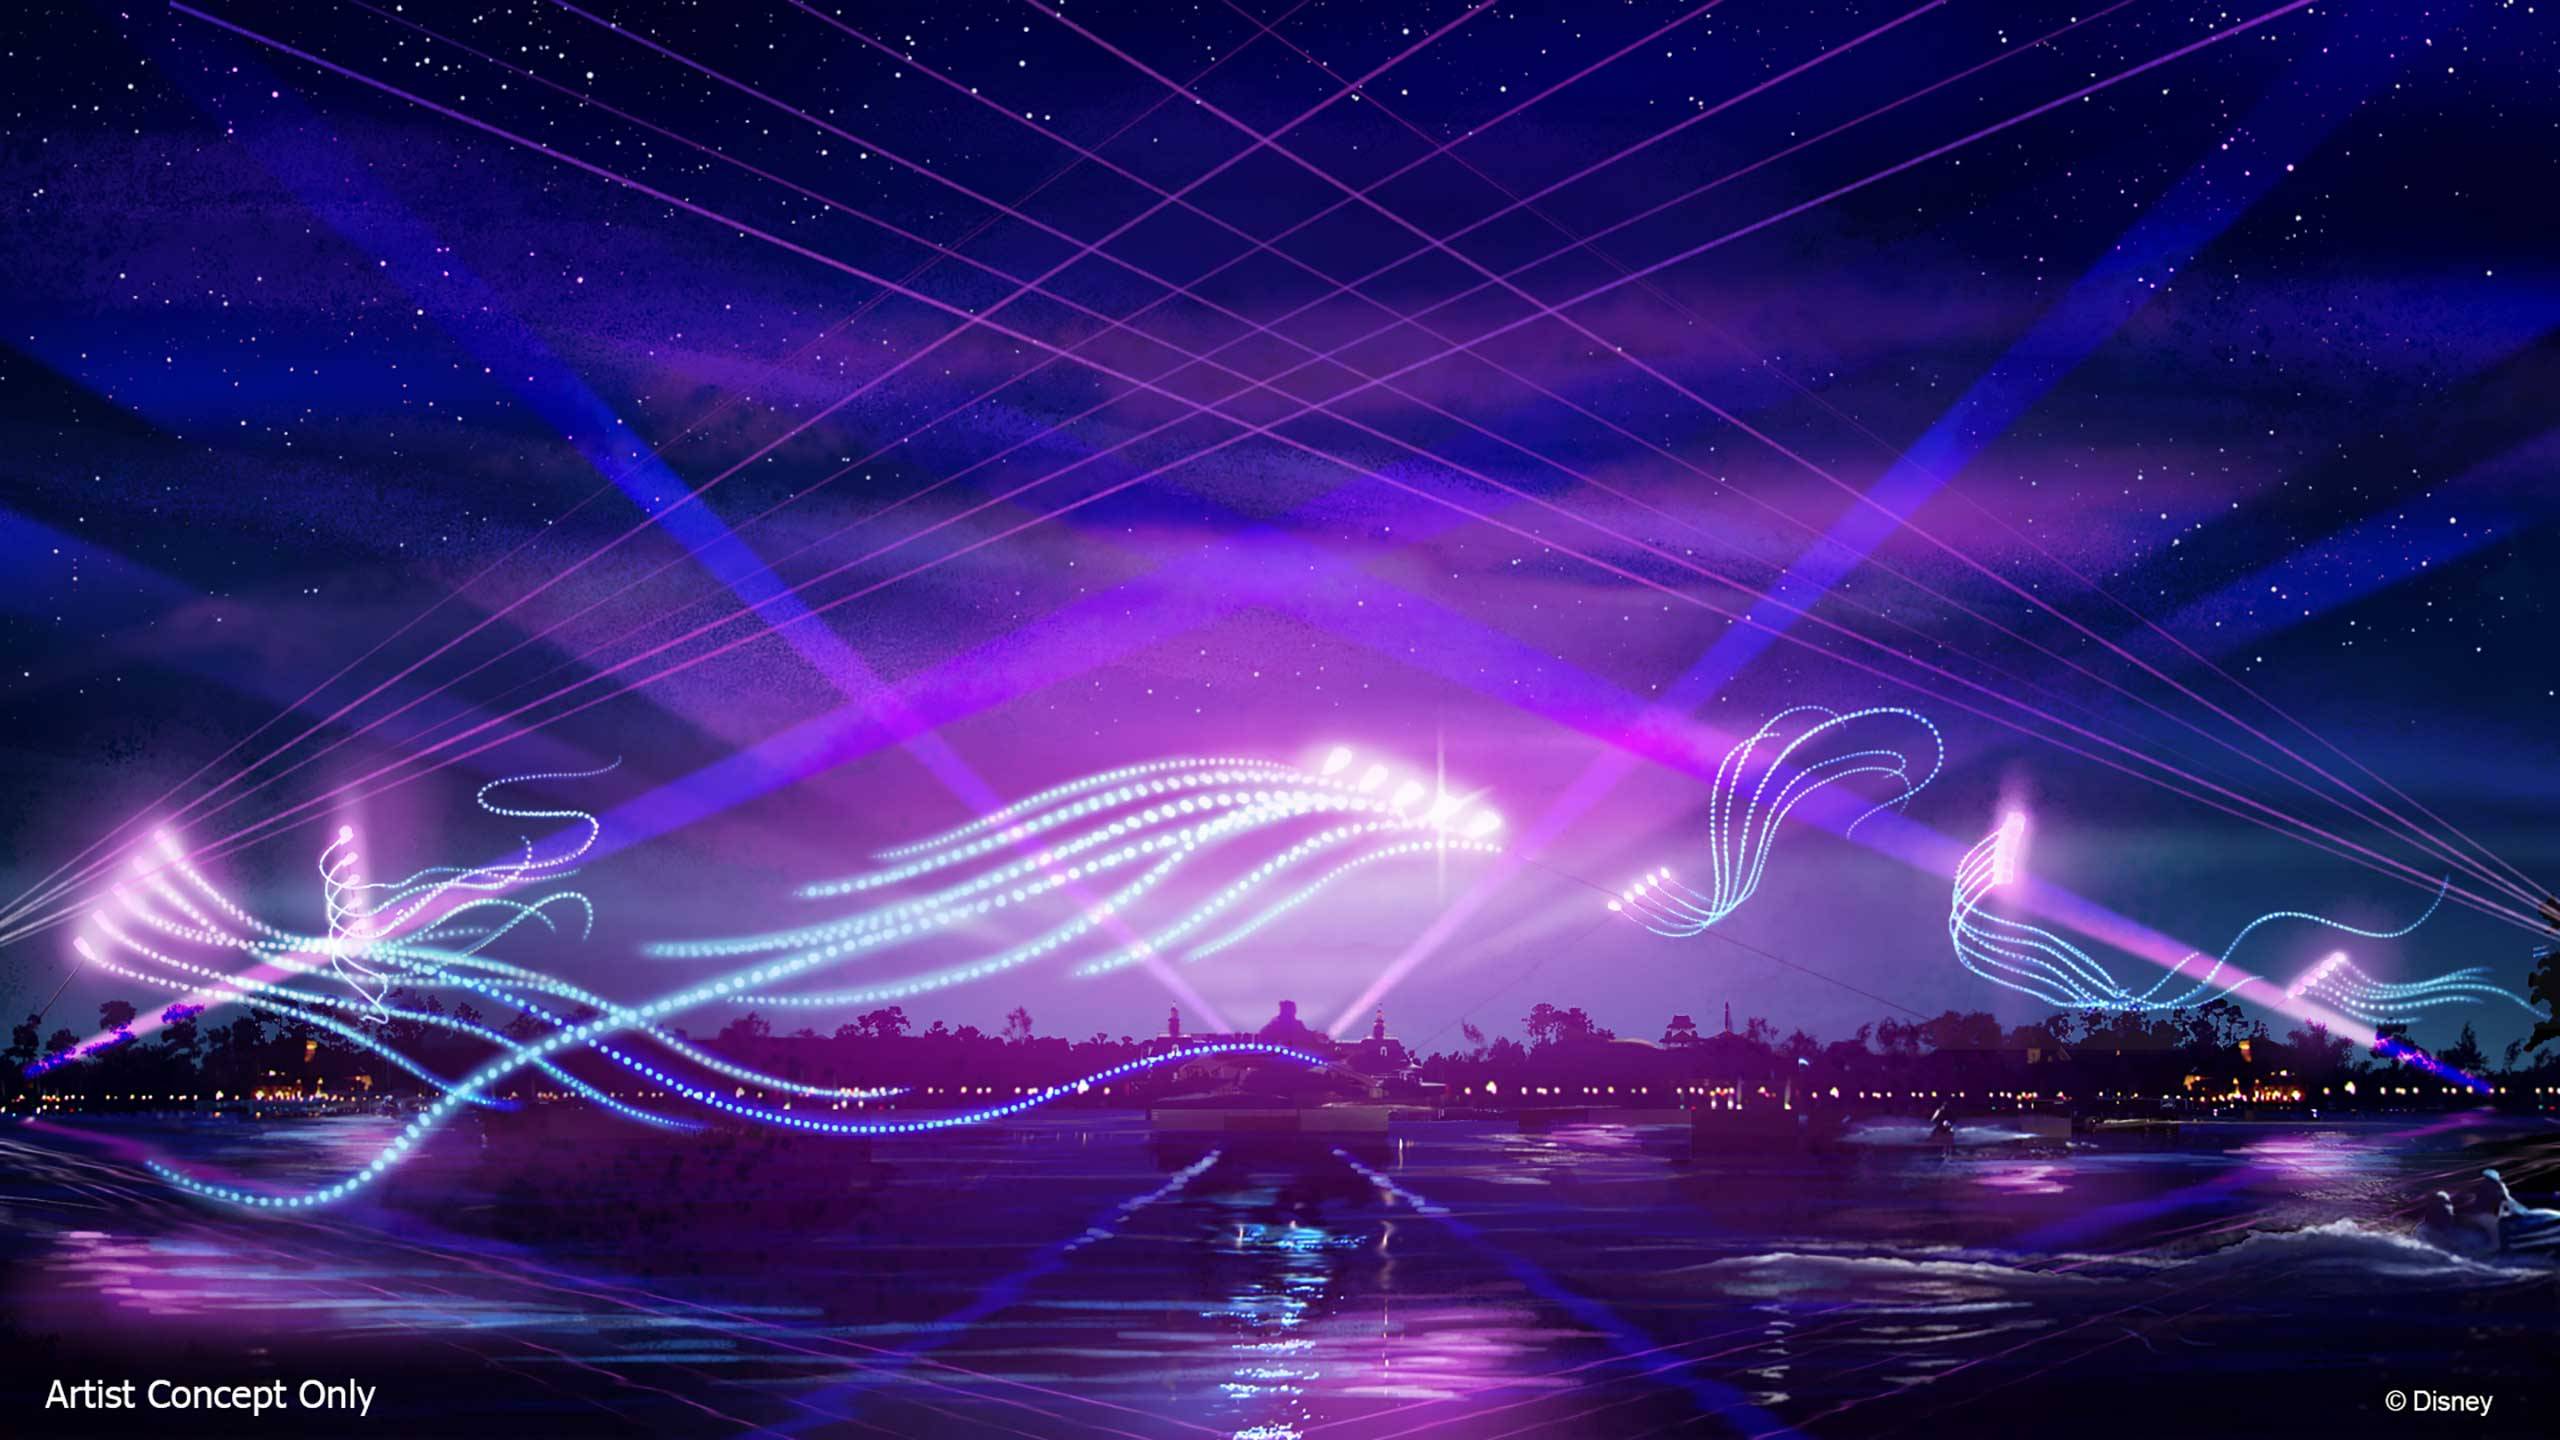 VIDEO - Epcot Forever nighttime spectacular to debut October 1 2019